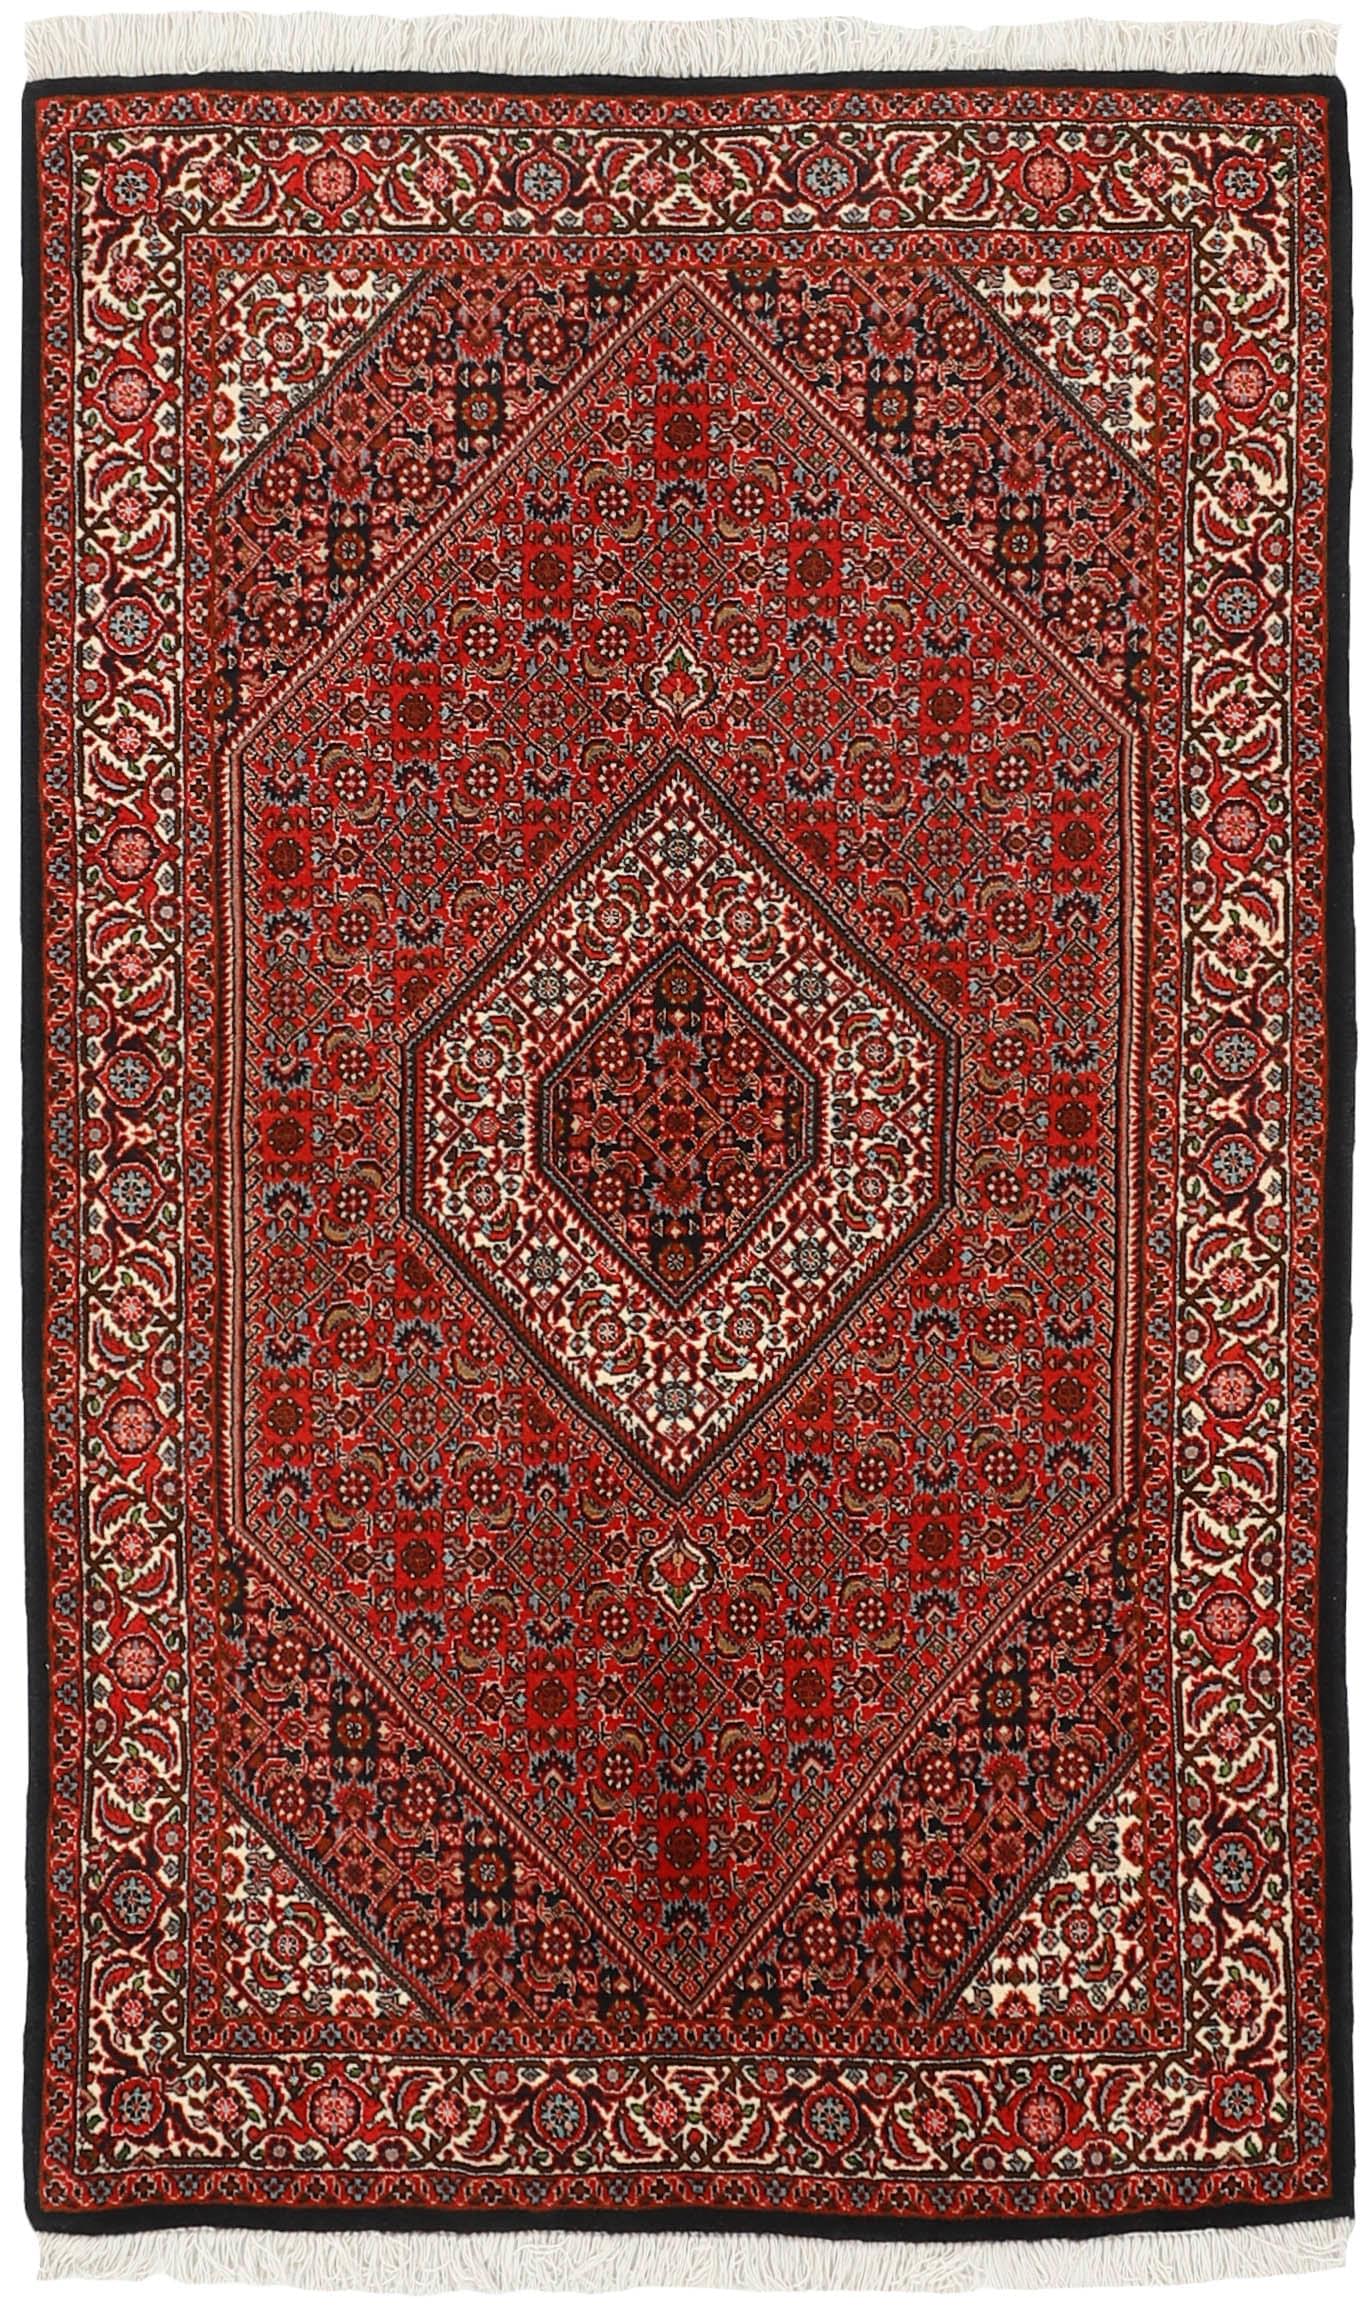 red and cream persian rug with traditional floral design